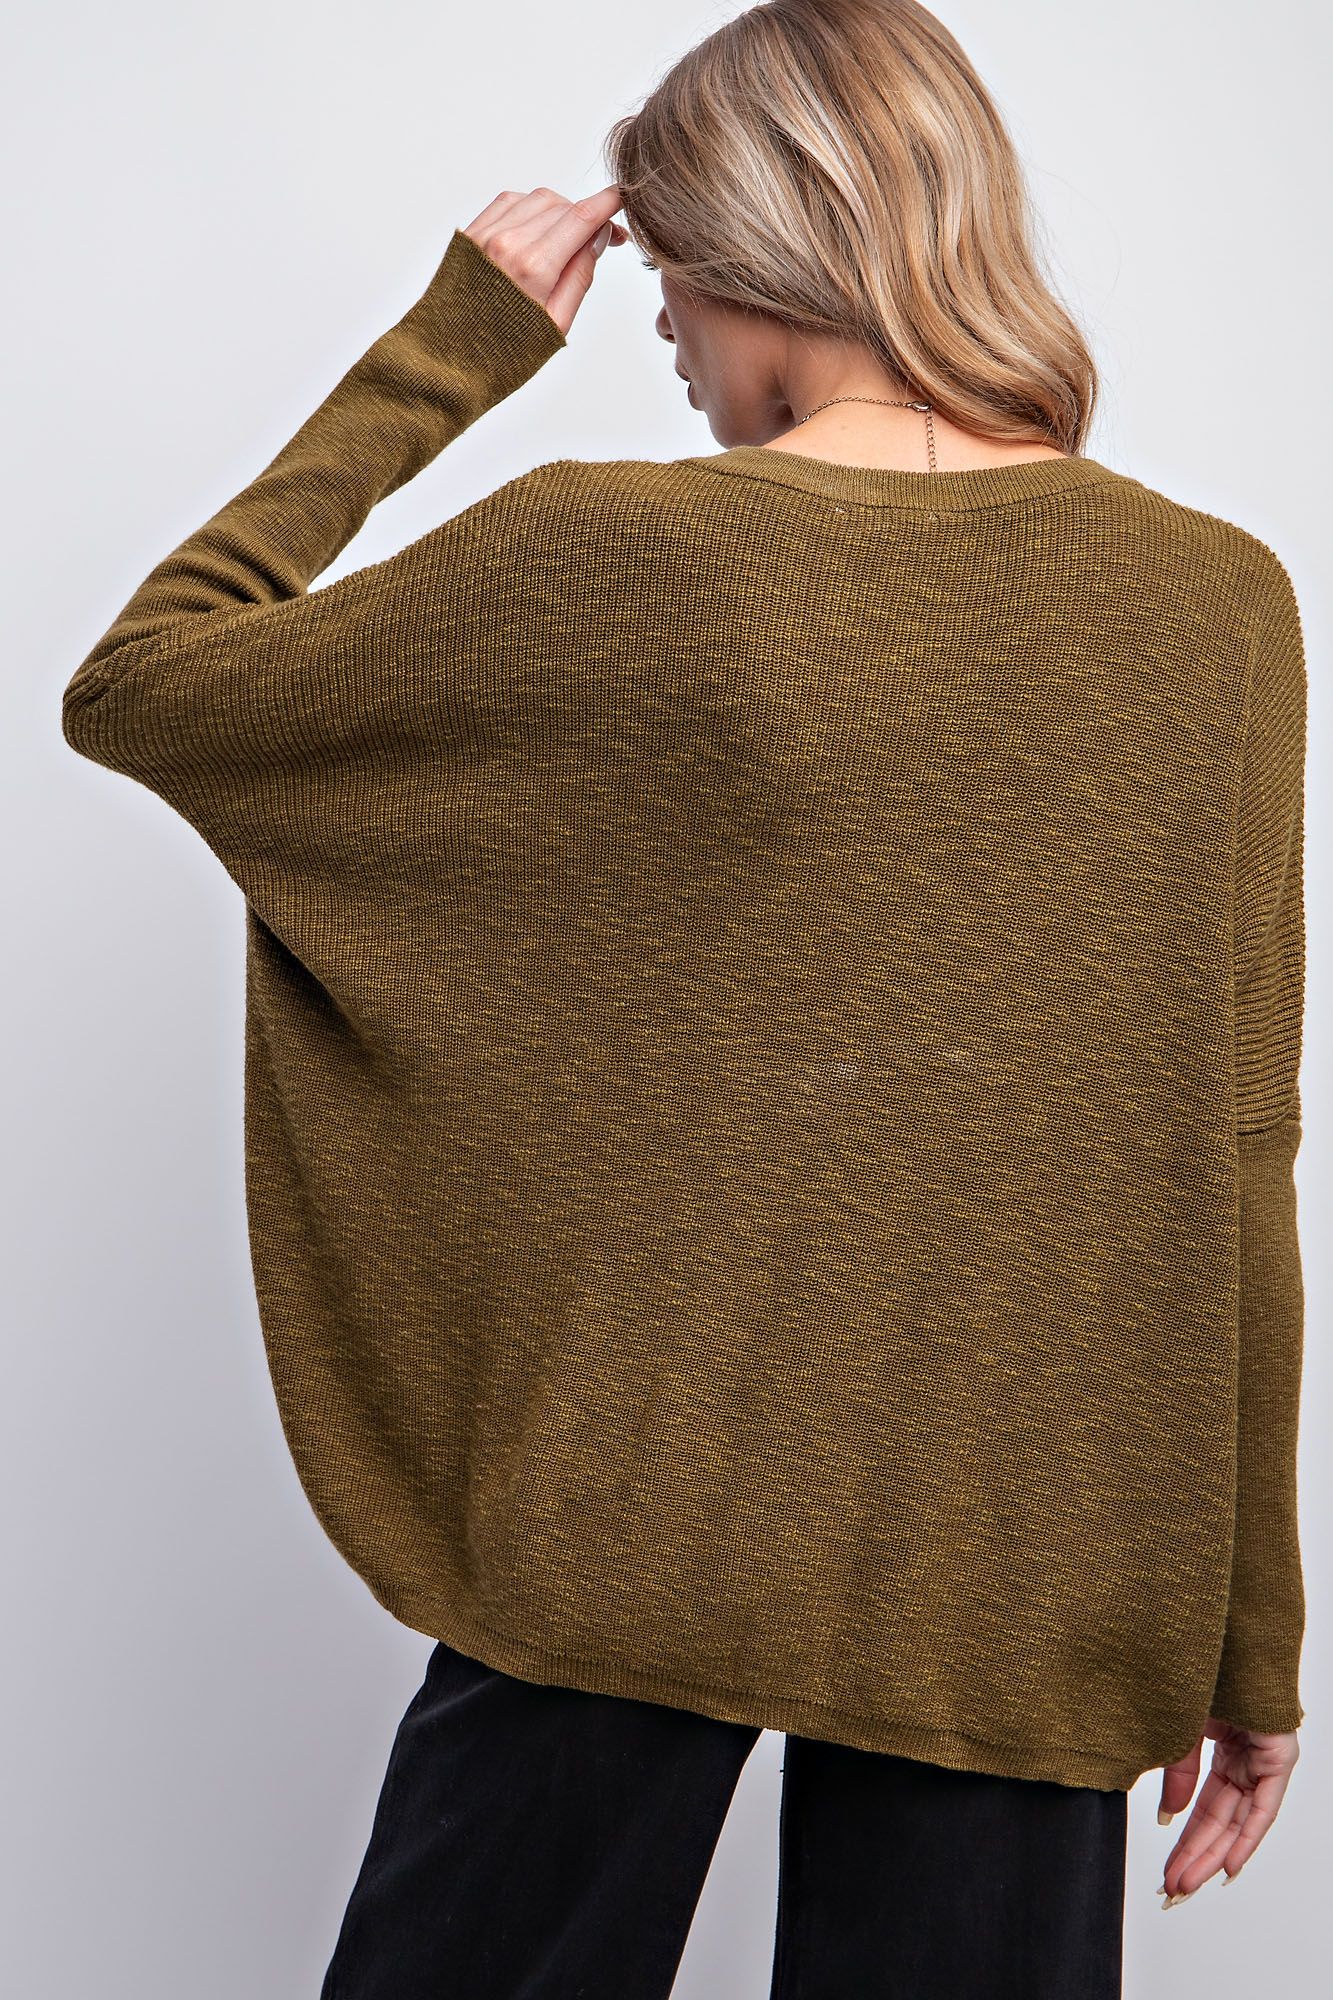 Easel Knitted Sweater Top Olive